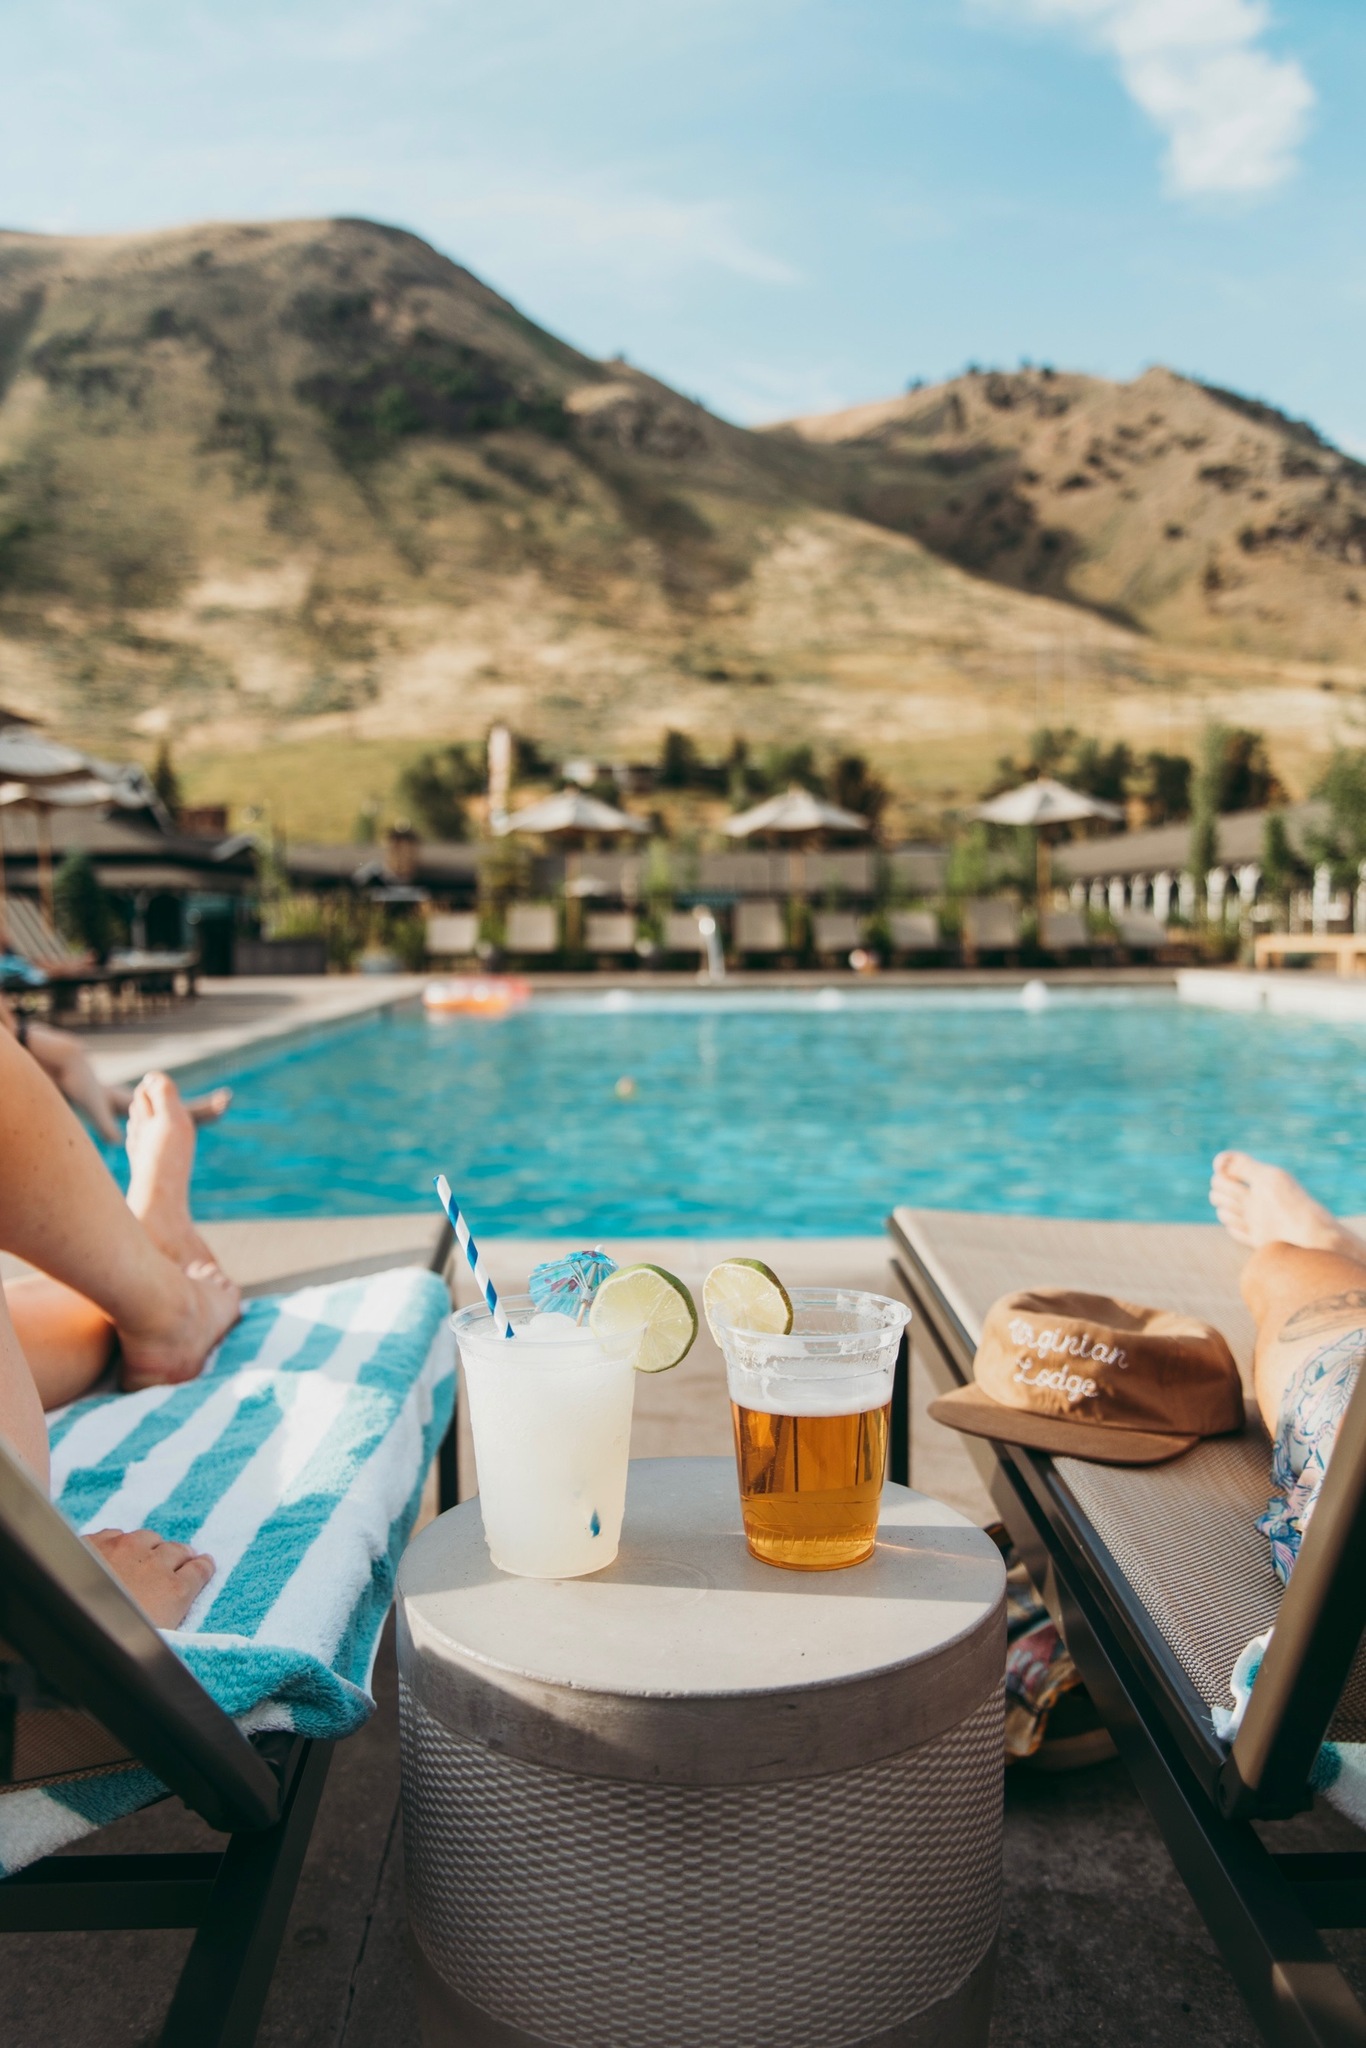 Lounge chairs by the pool provide a perfect vantage for admiring the lush green mountain.